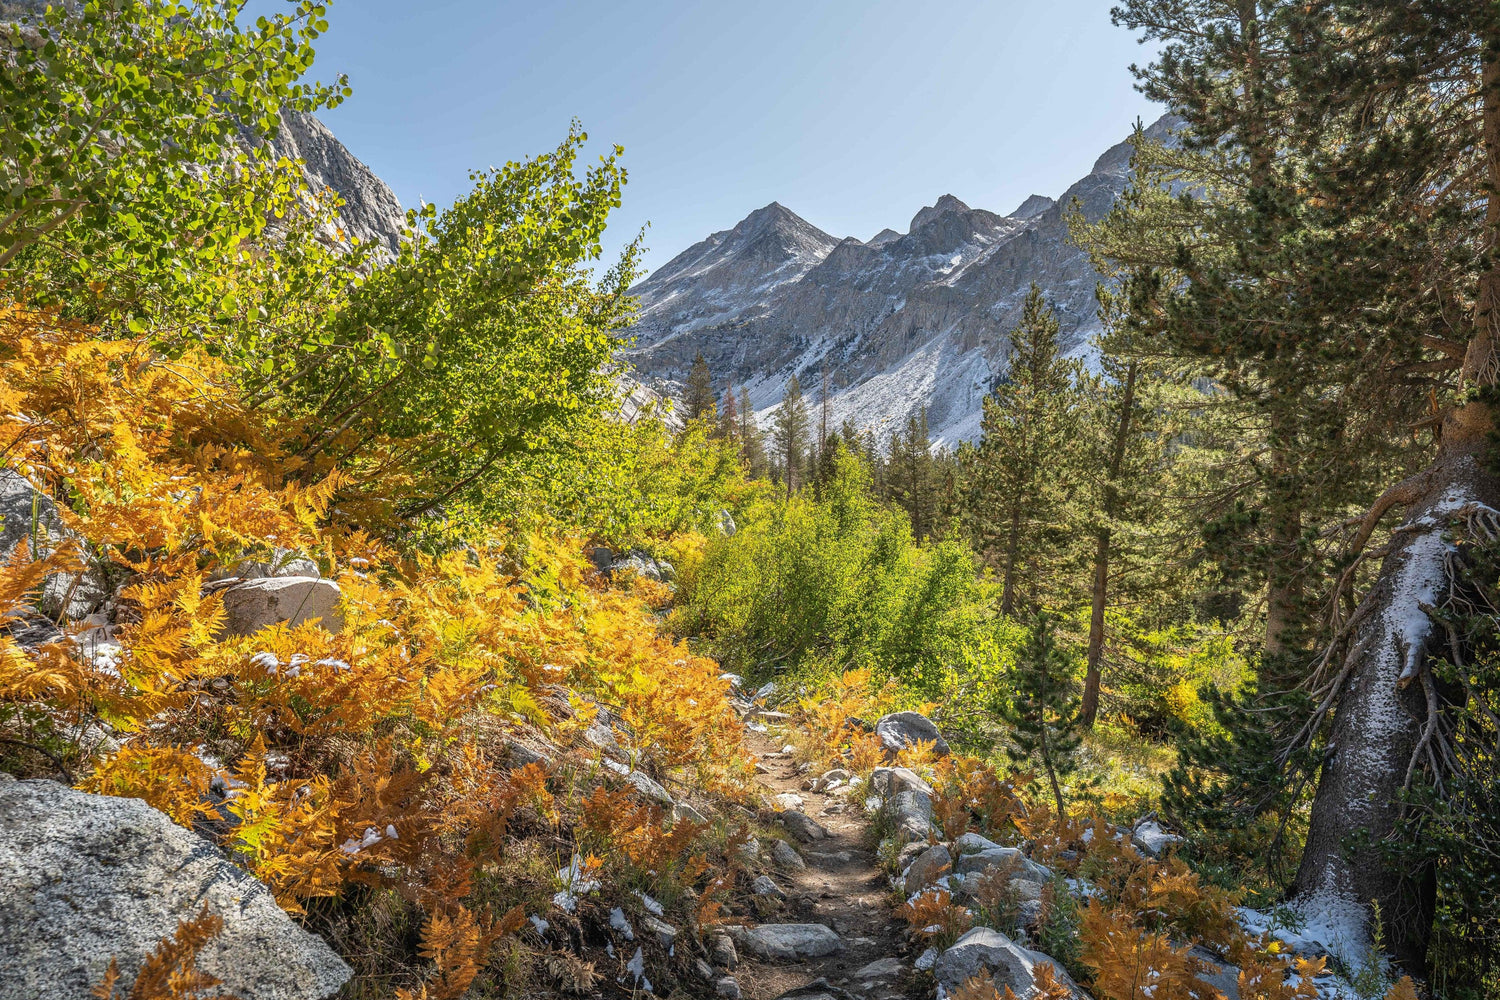 Fine photographic print of a multicolored autumn landscape hiking through the forested mountains of the Pacific Crest Trail.